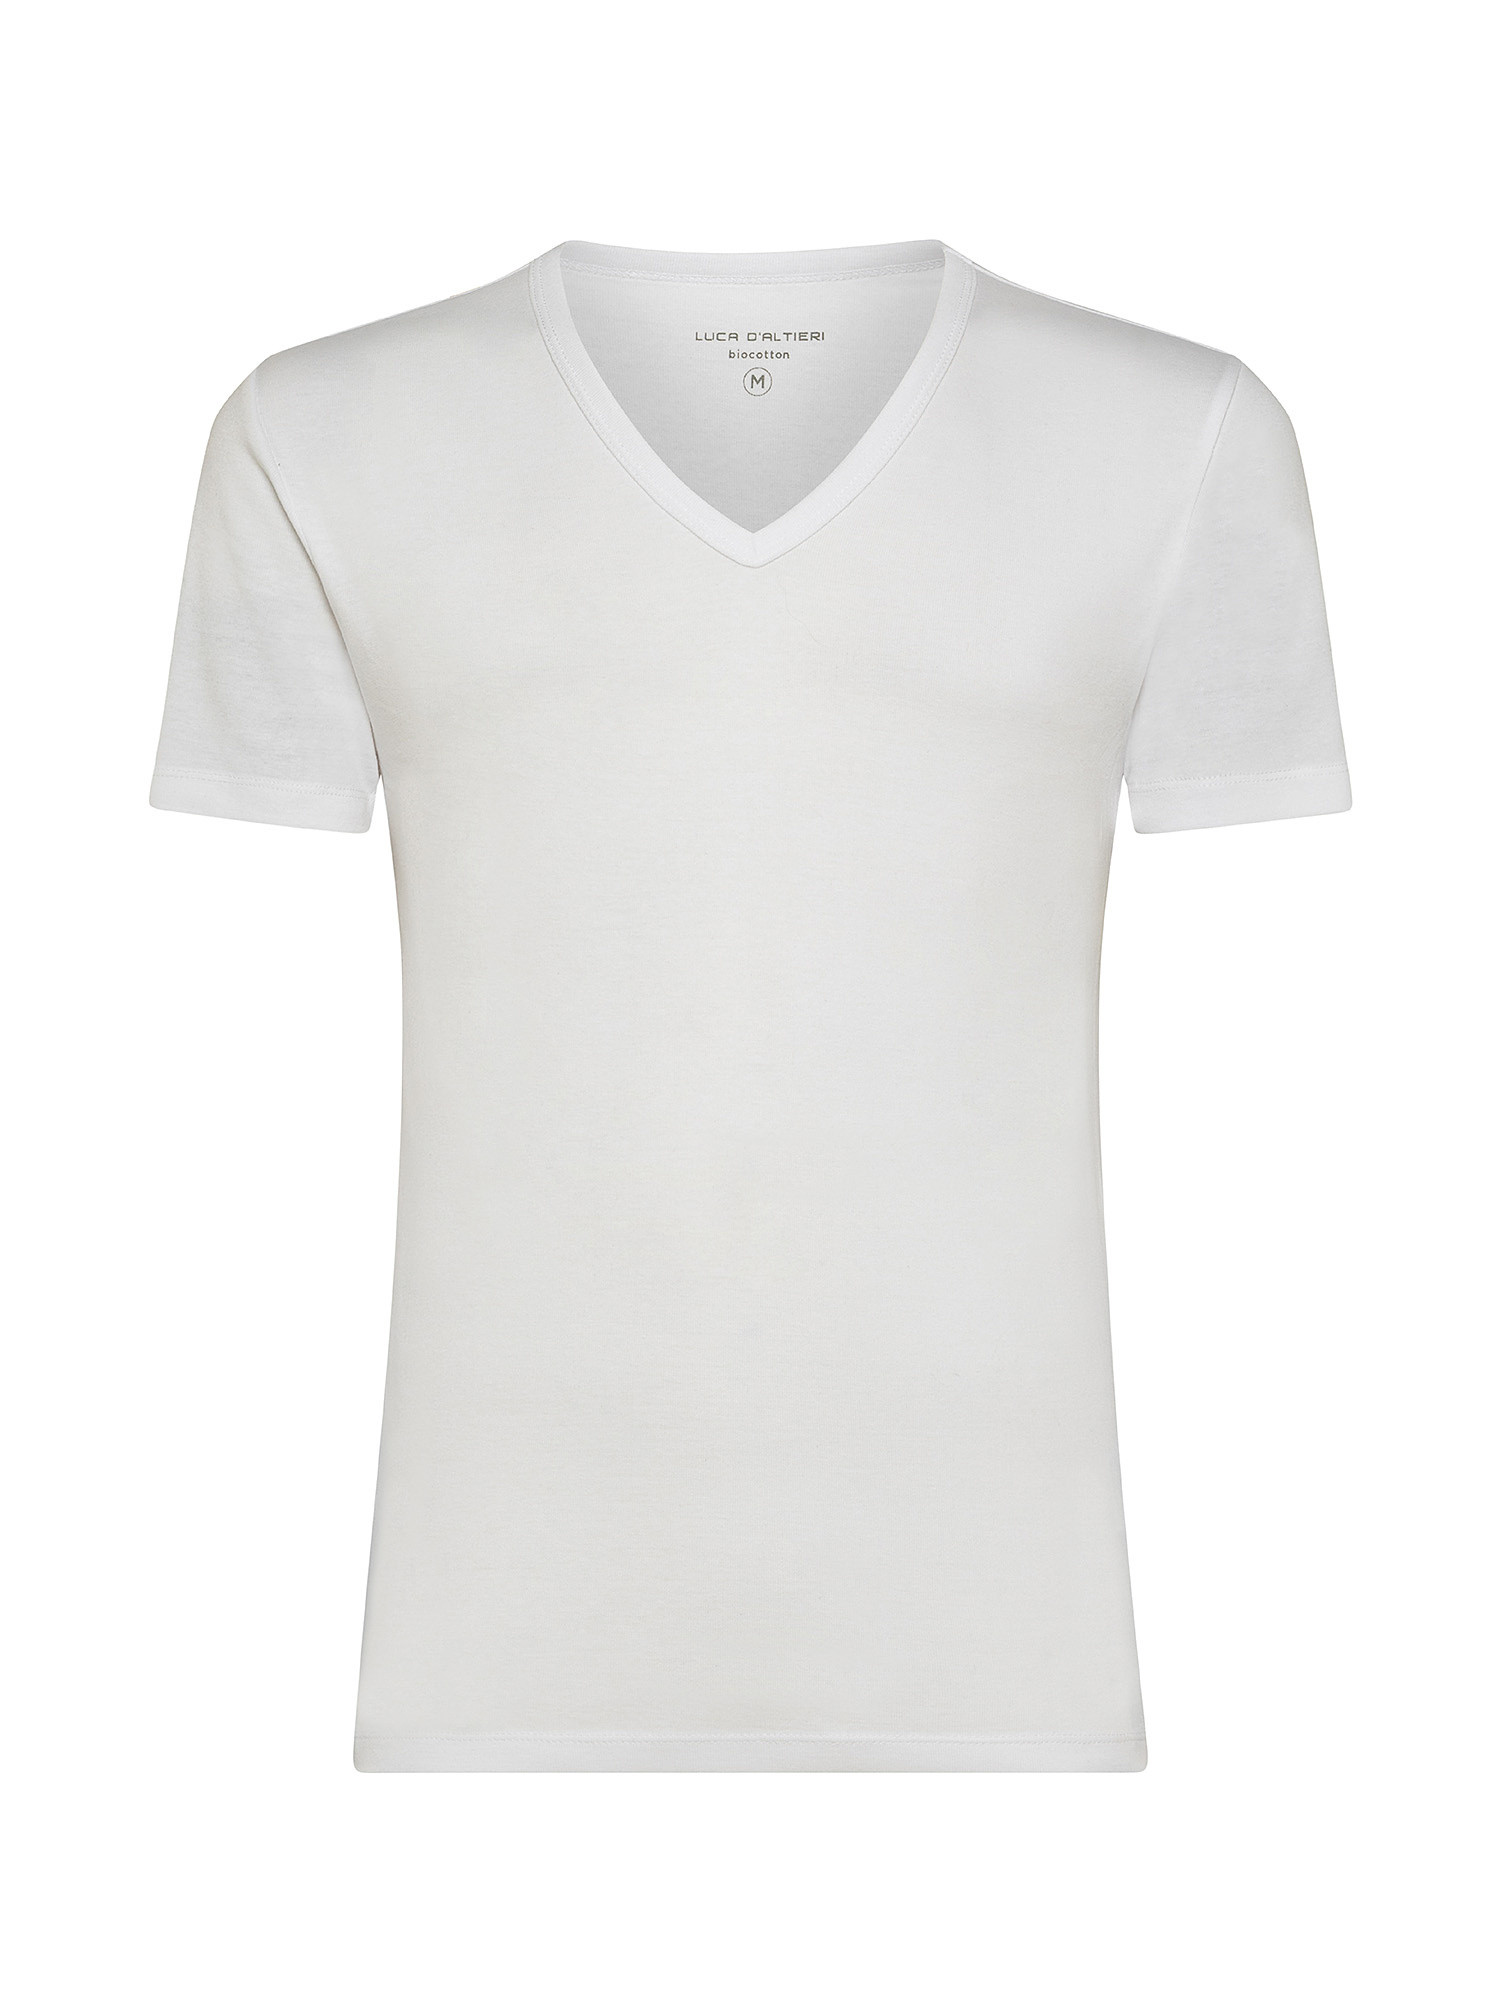 Luca D'Altieri - Set of 2 t-shirts, White, large image number 0